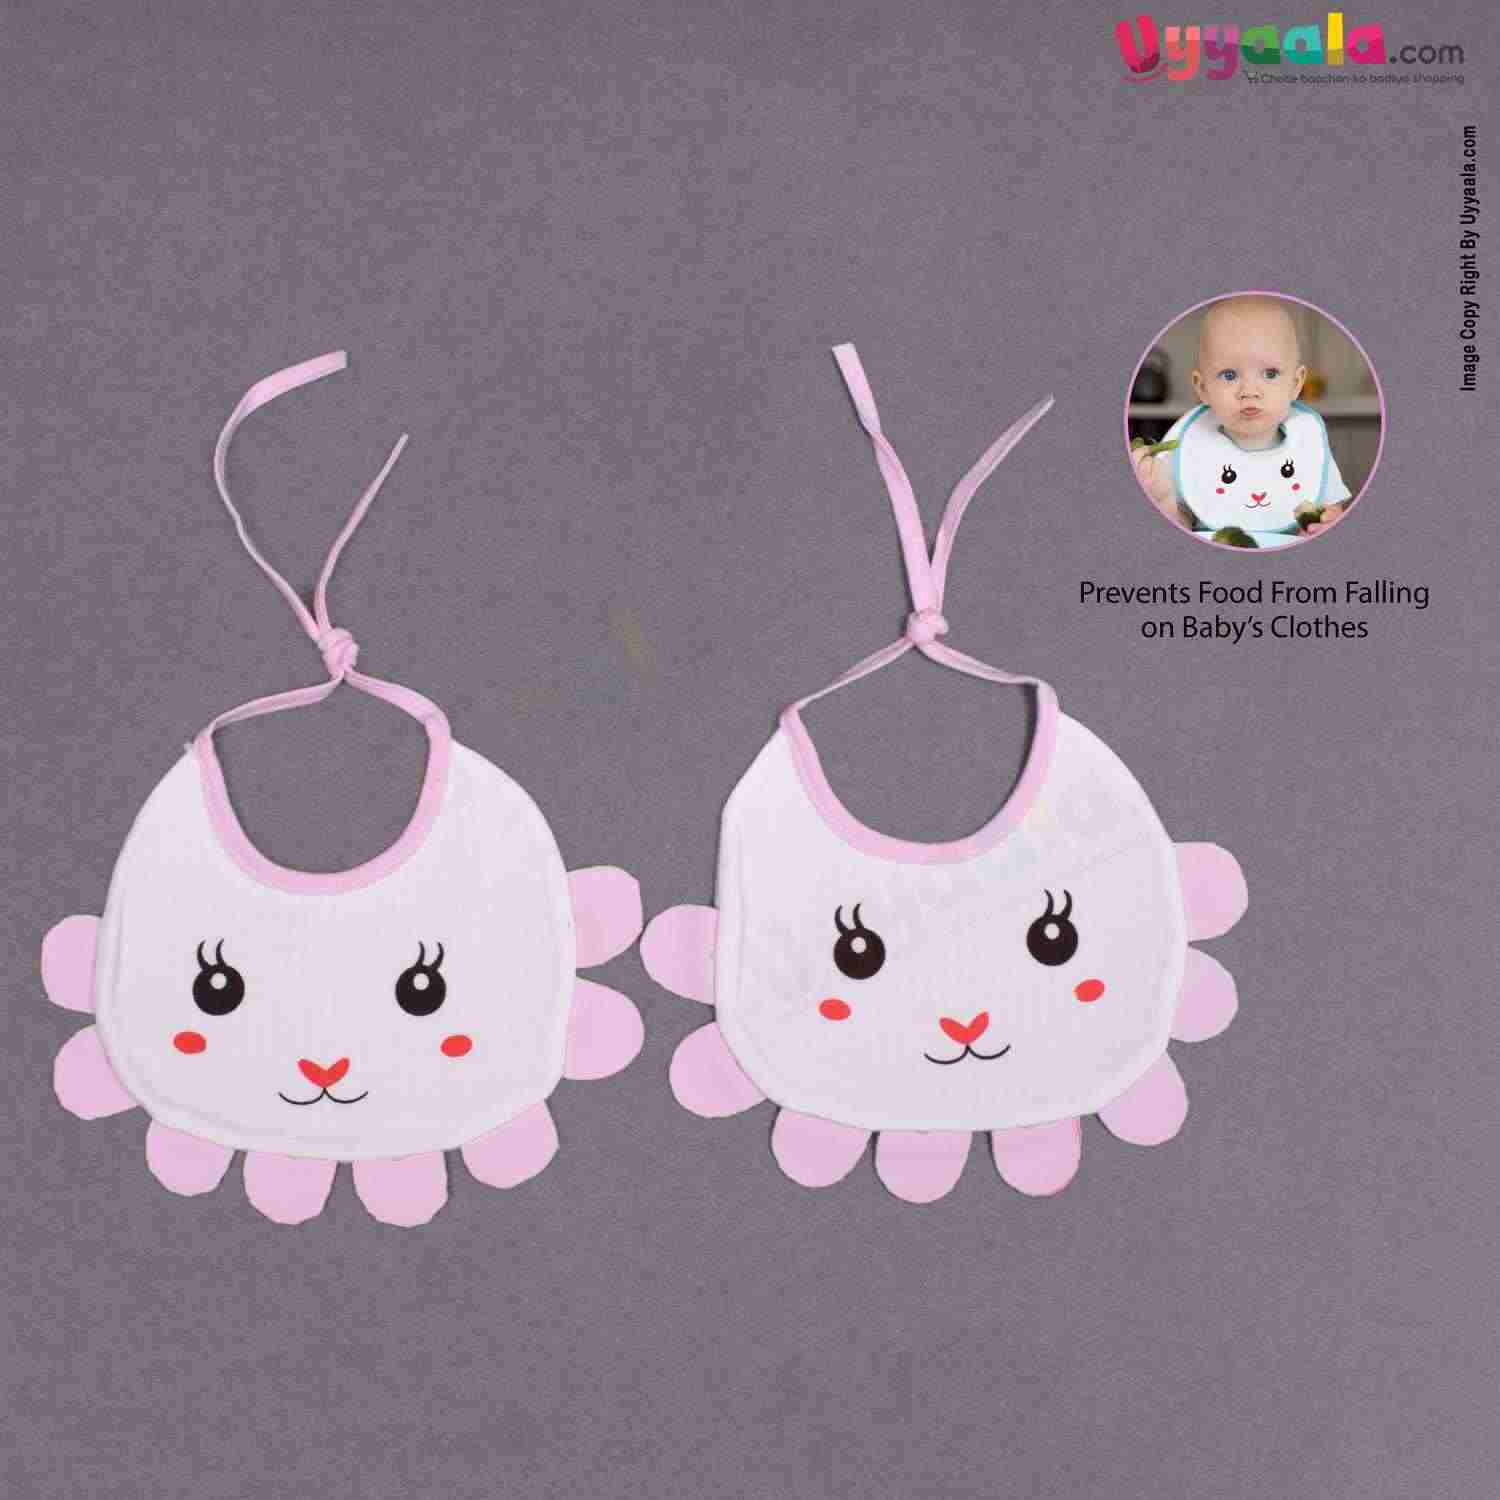 Baby Bib Soft Cotton Hosiery with Cute Kitty Print Pack of 2, Size(17*23cm)-White & Pink